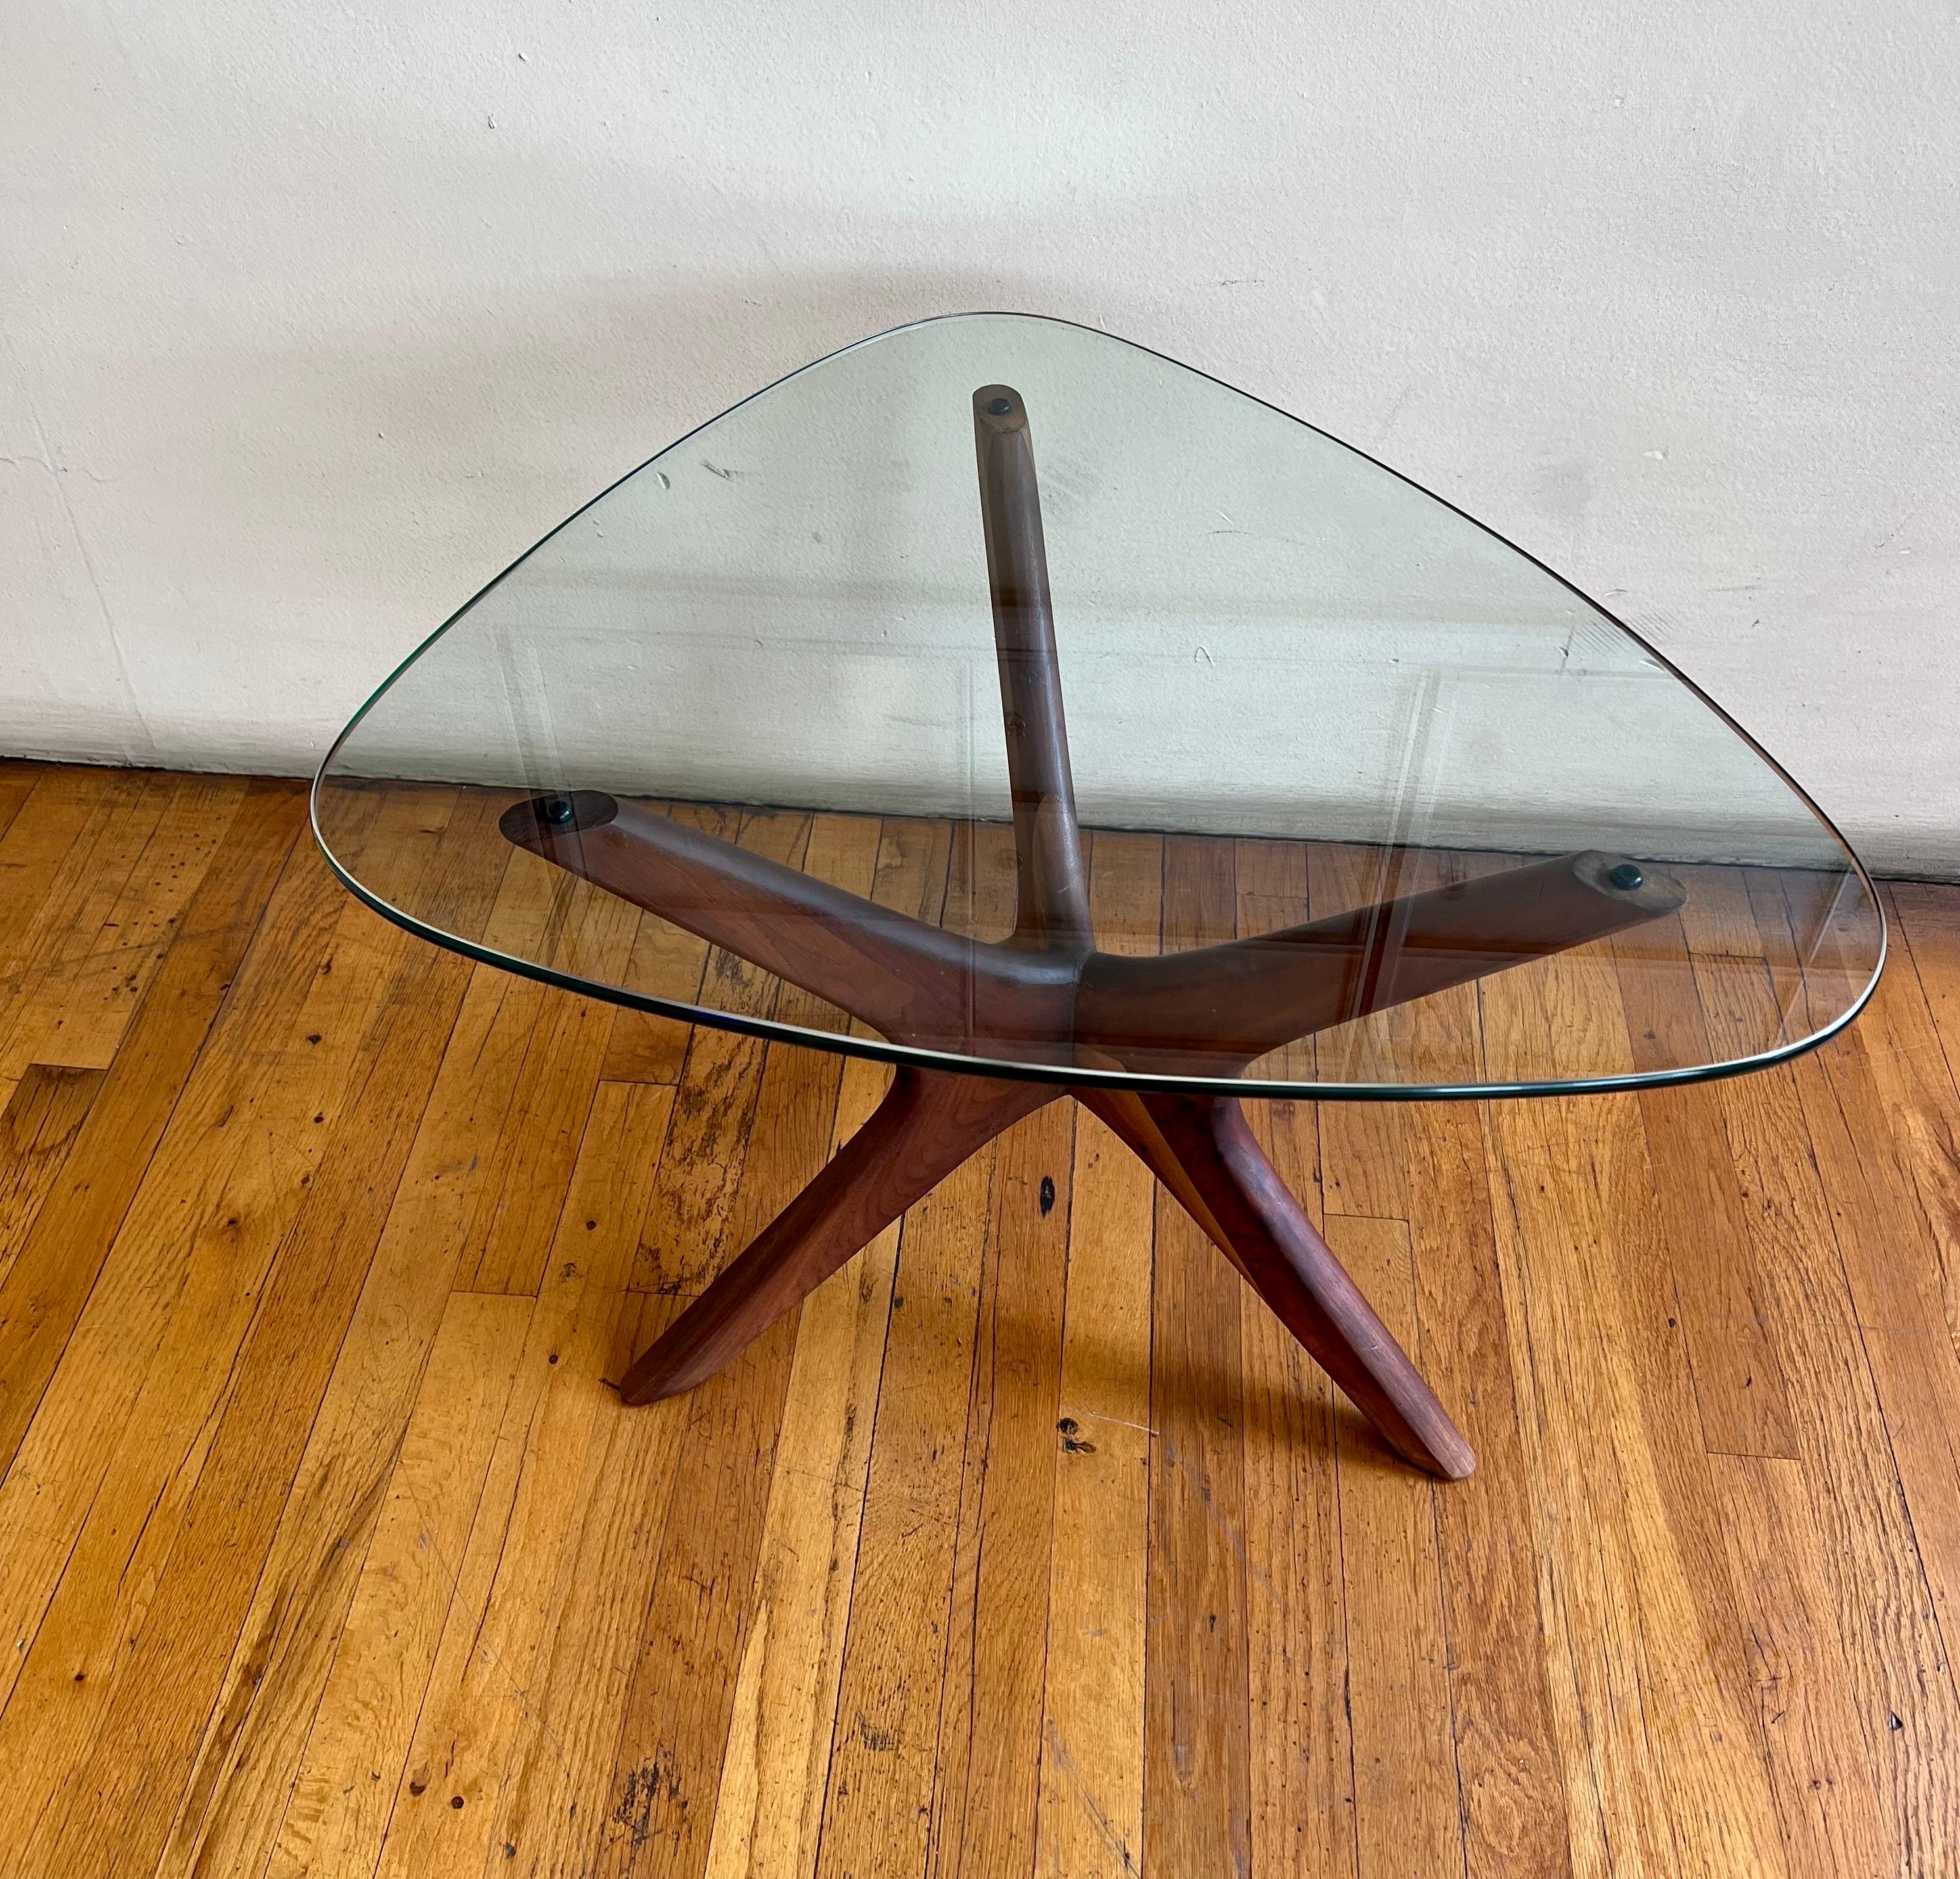 Beautifully sculpted walnut wood base with freeform glass top, circa 1960's great condition solid sturdy, and good looking.